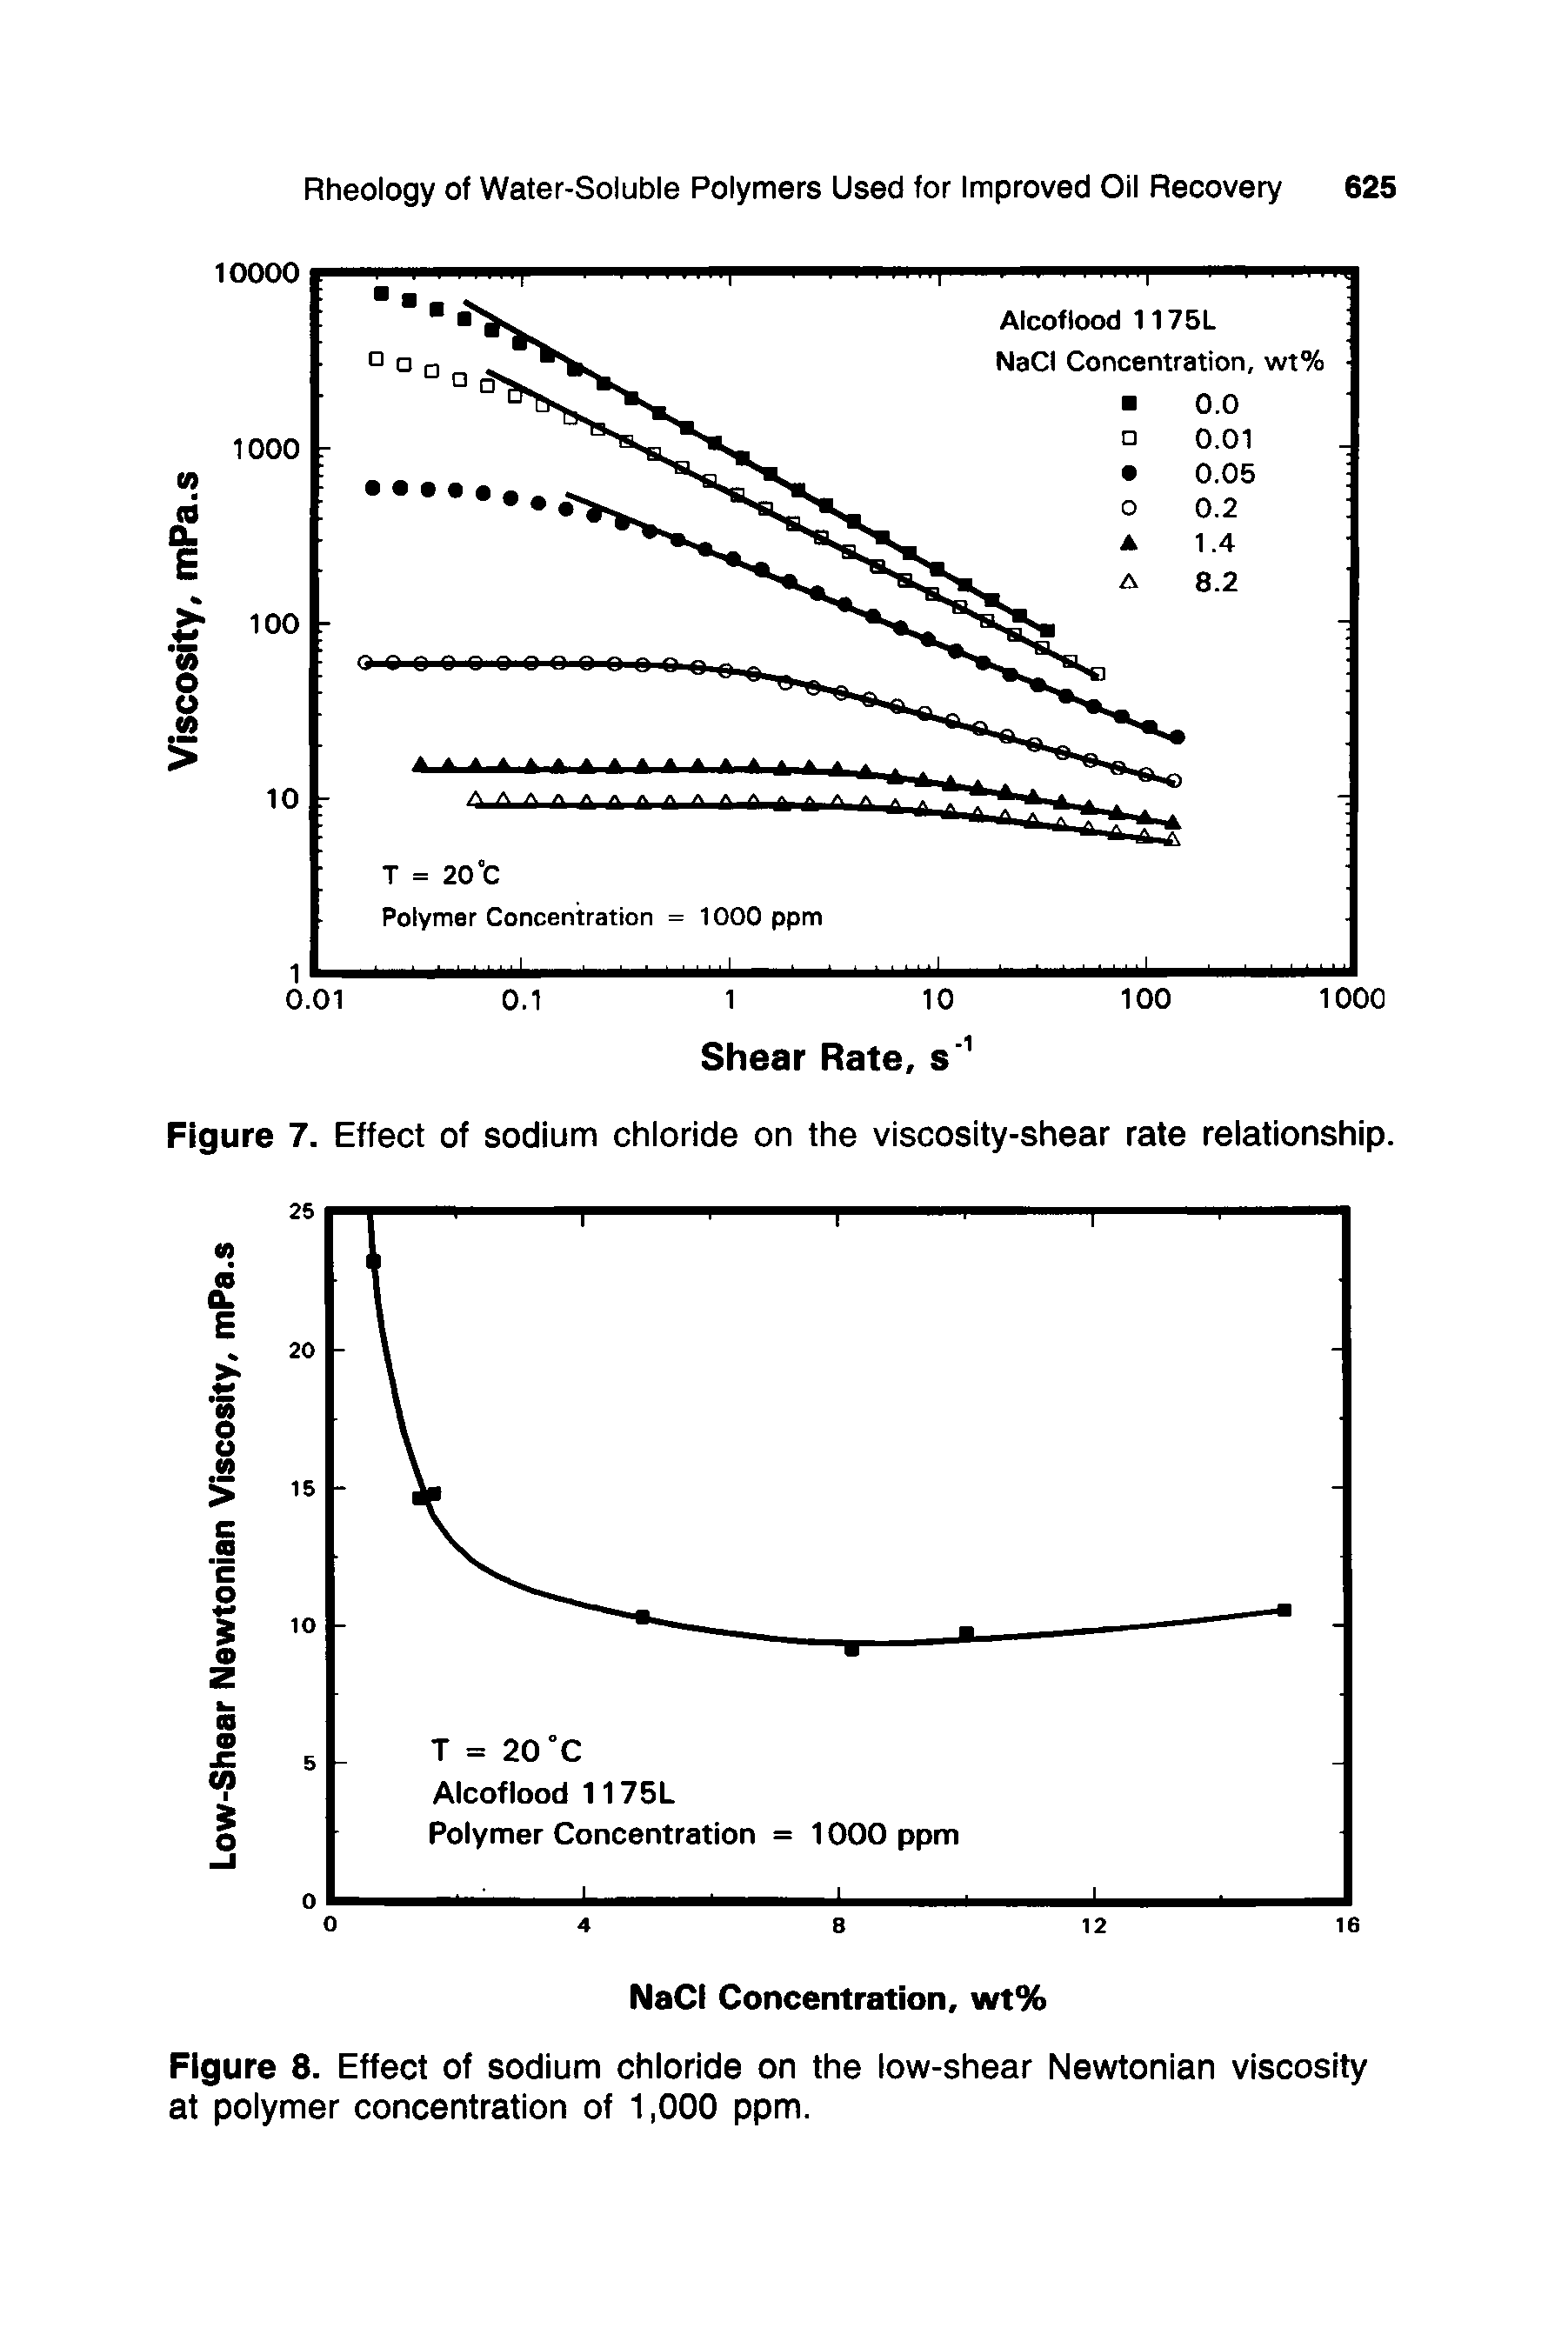 Figure 7. Effect of sodium chloride on the viscosity-shear rate relationship.